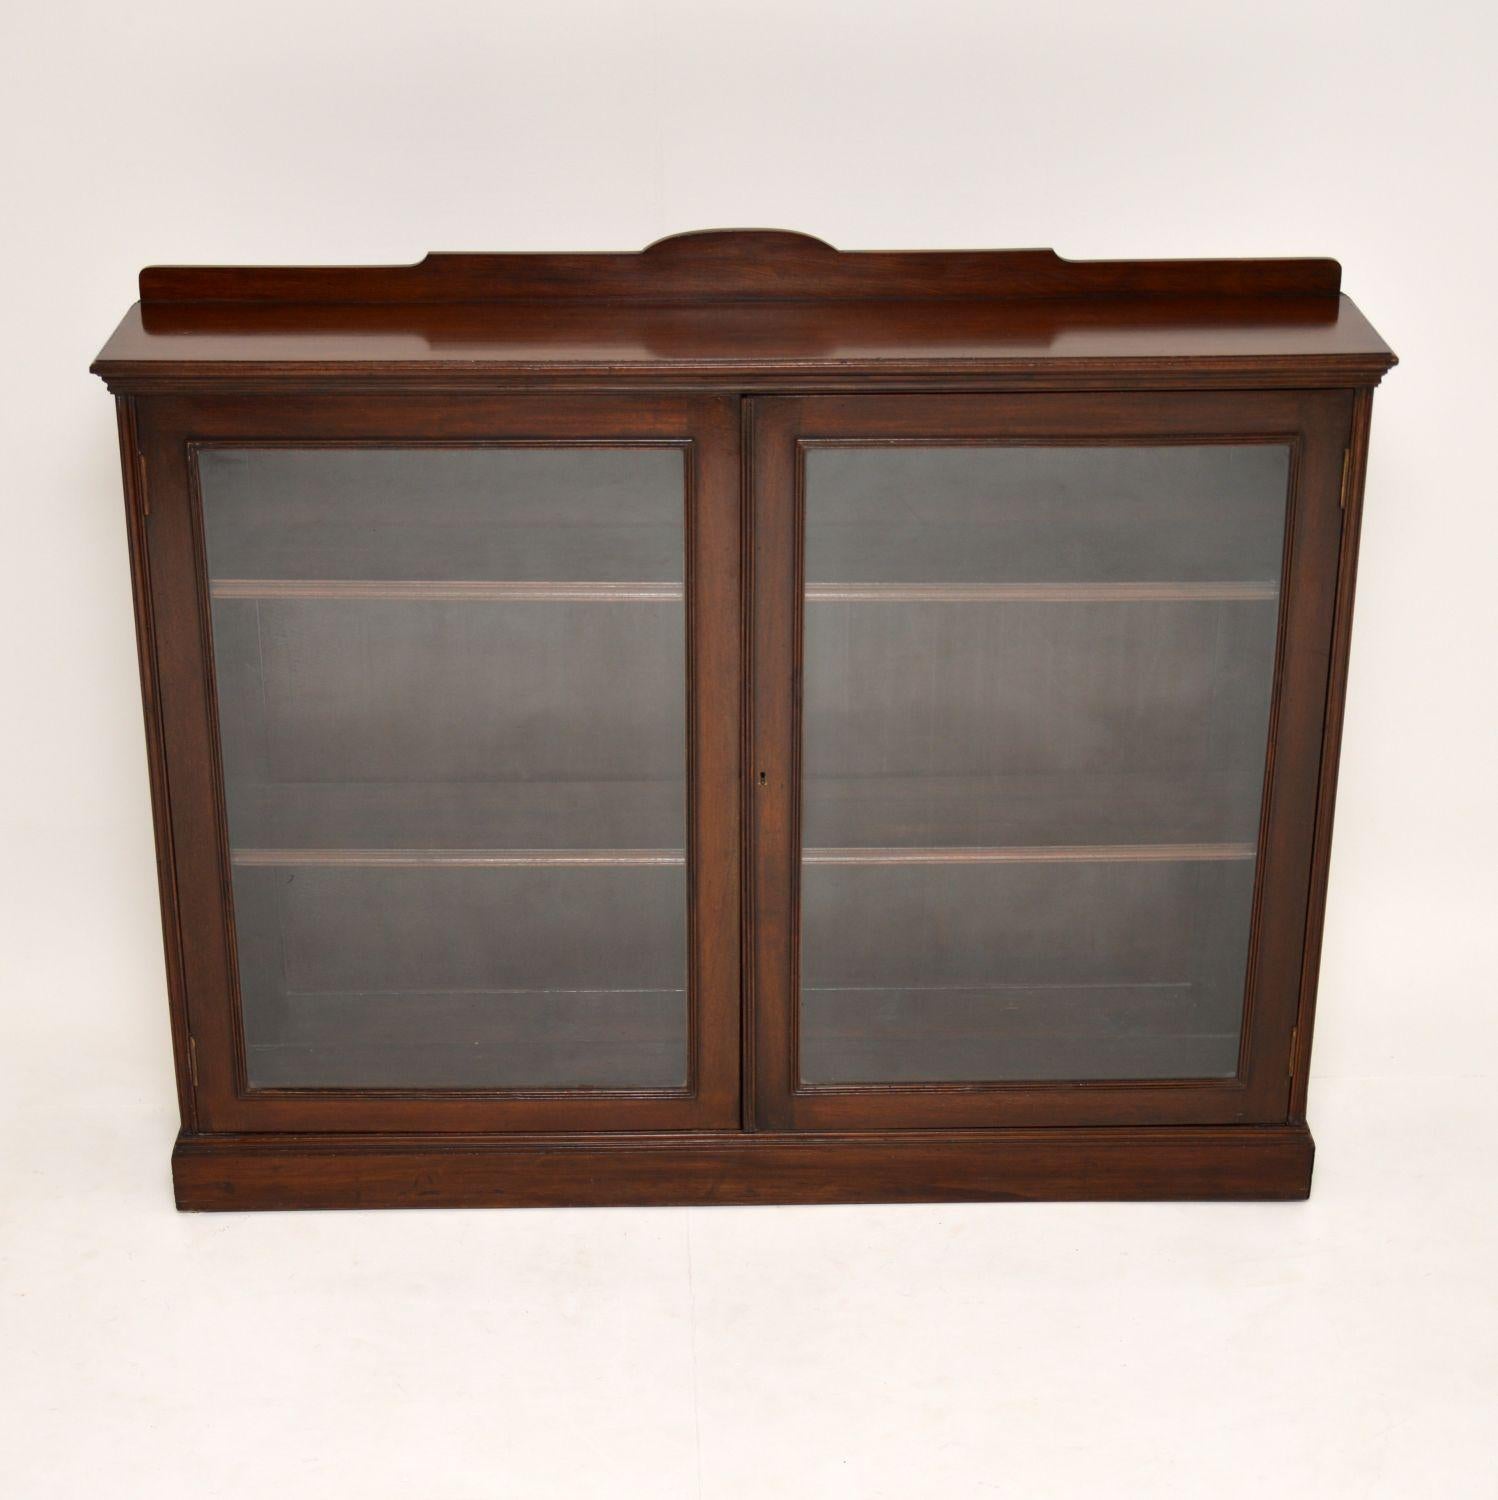 This antique late Victorian mahogany bookcase is very fine quality and quite narrow from front to back.

It’s in very good original condition and dates from the 1890-1900 period.

The doors and central beading are reeded and the top of this